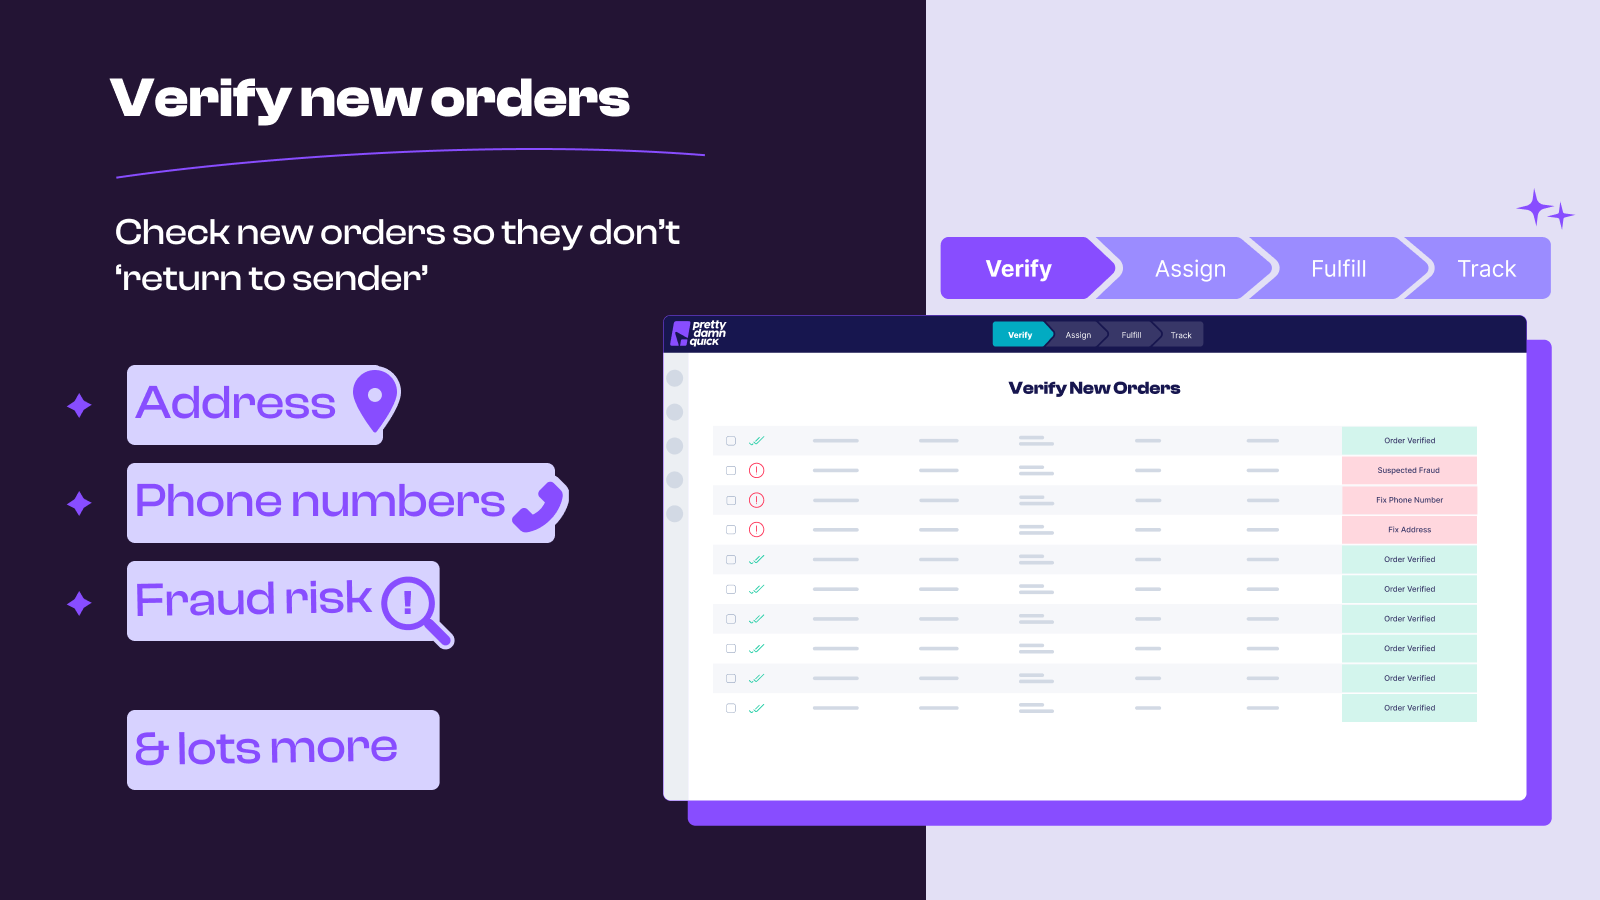 Verify new orders before delivery